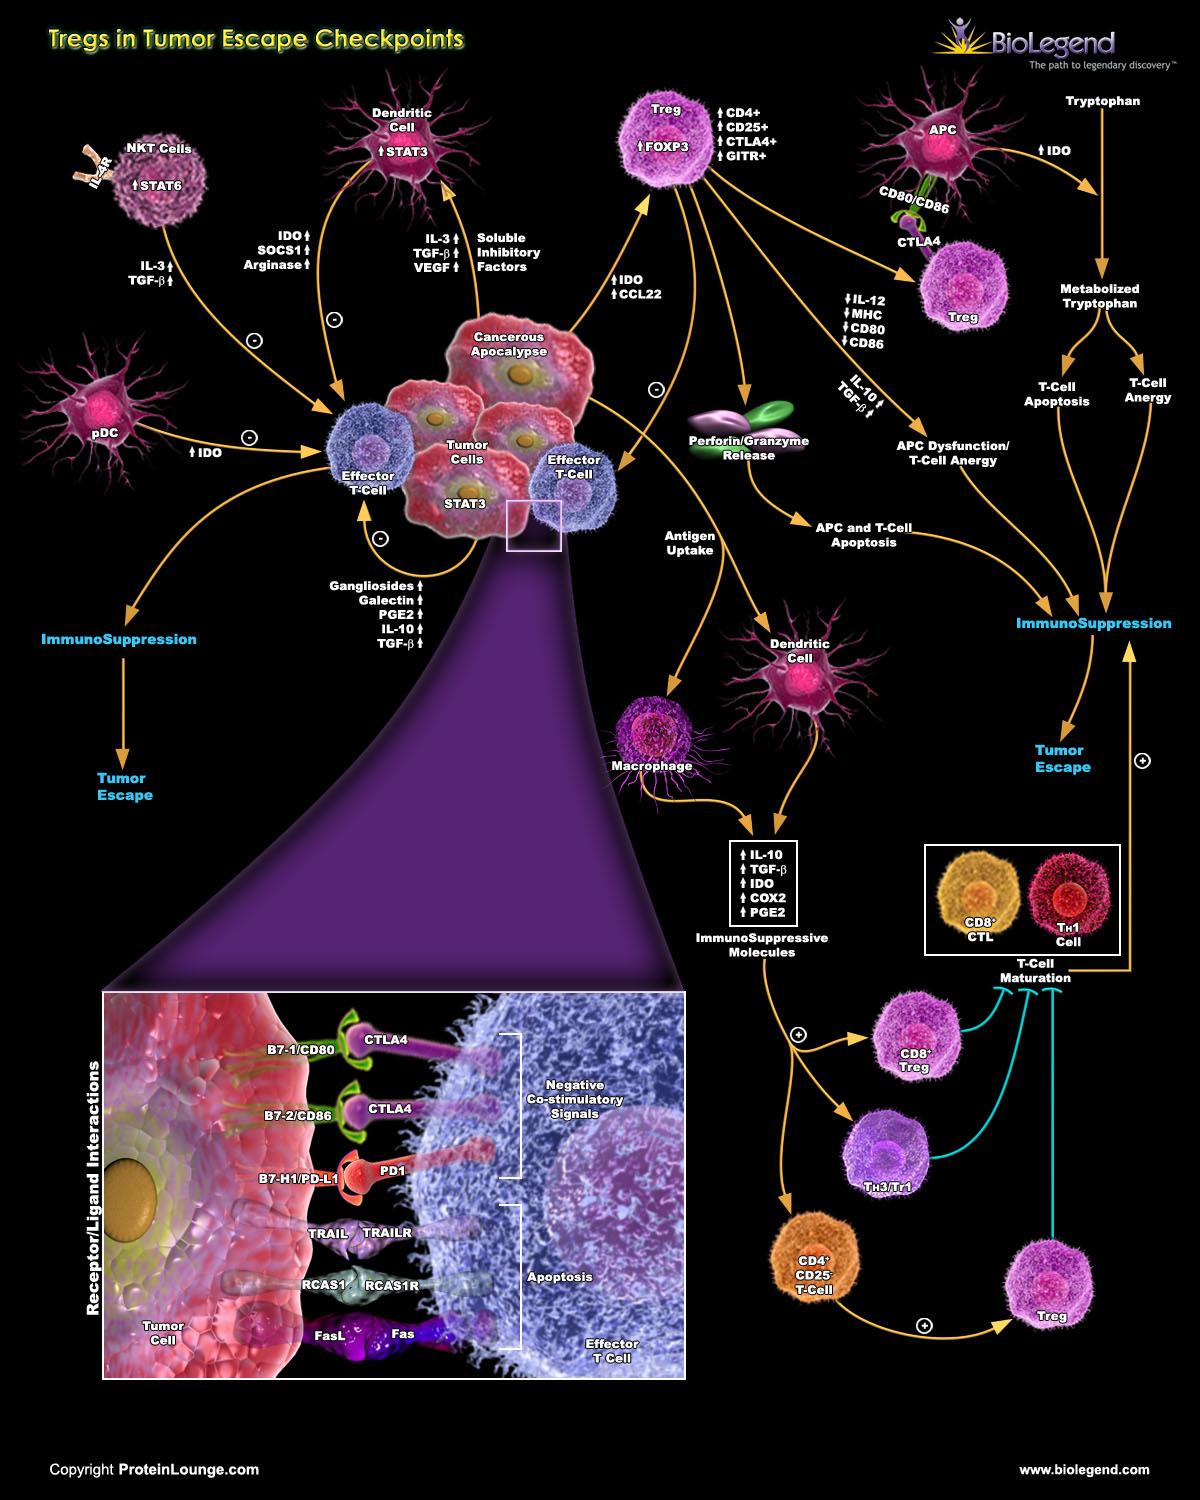 Tregs in Tumor Escape scientific pathway and products from BioLegend